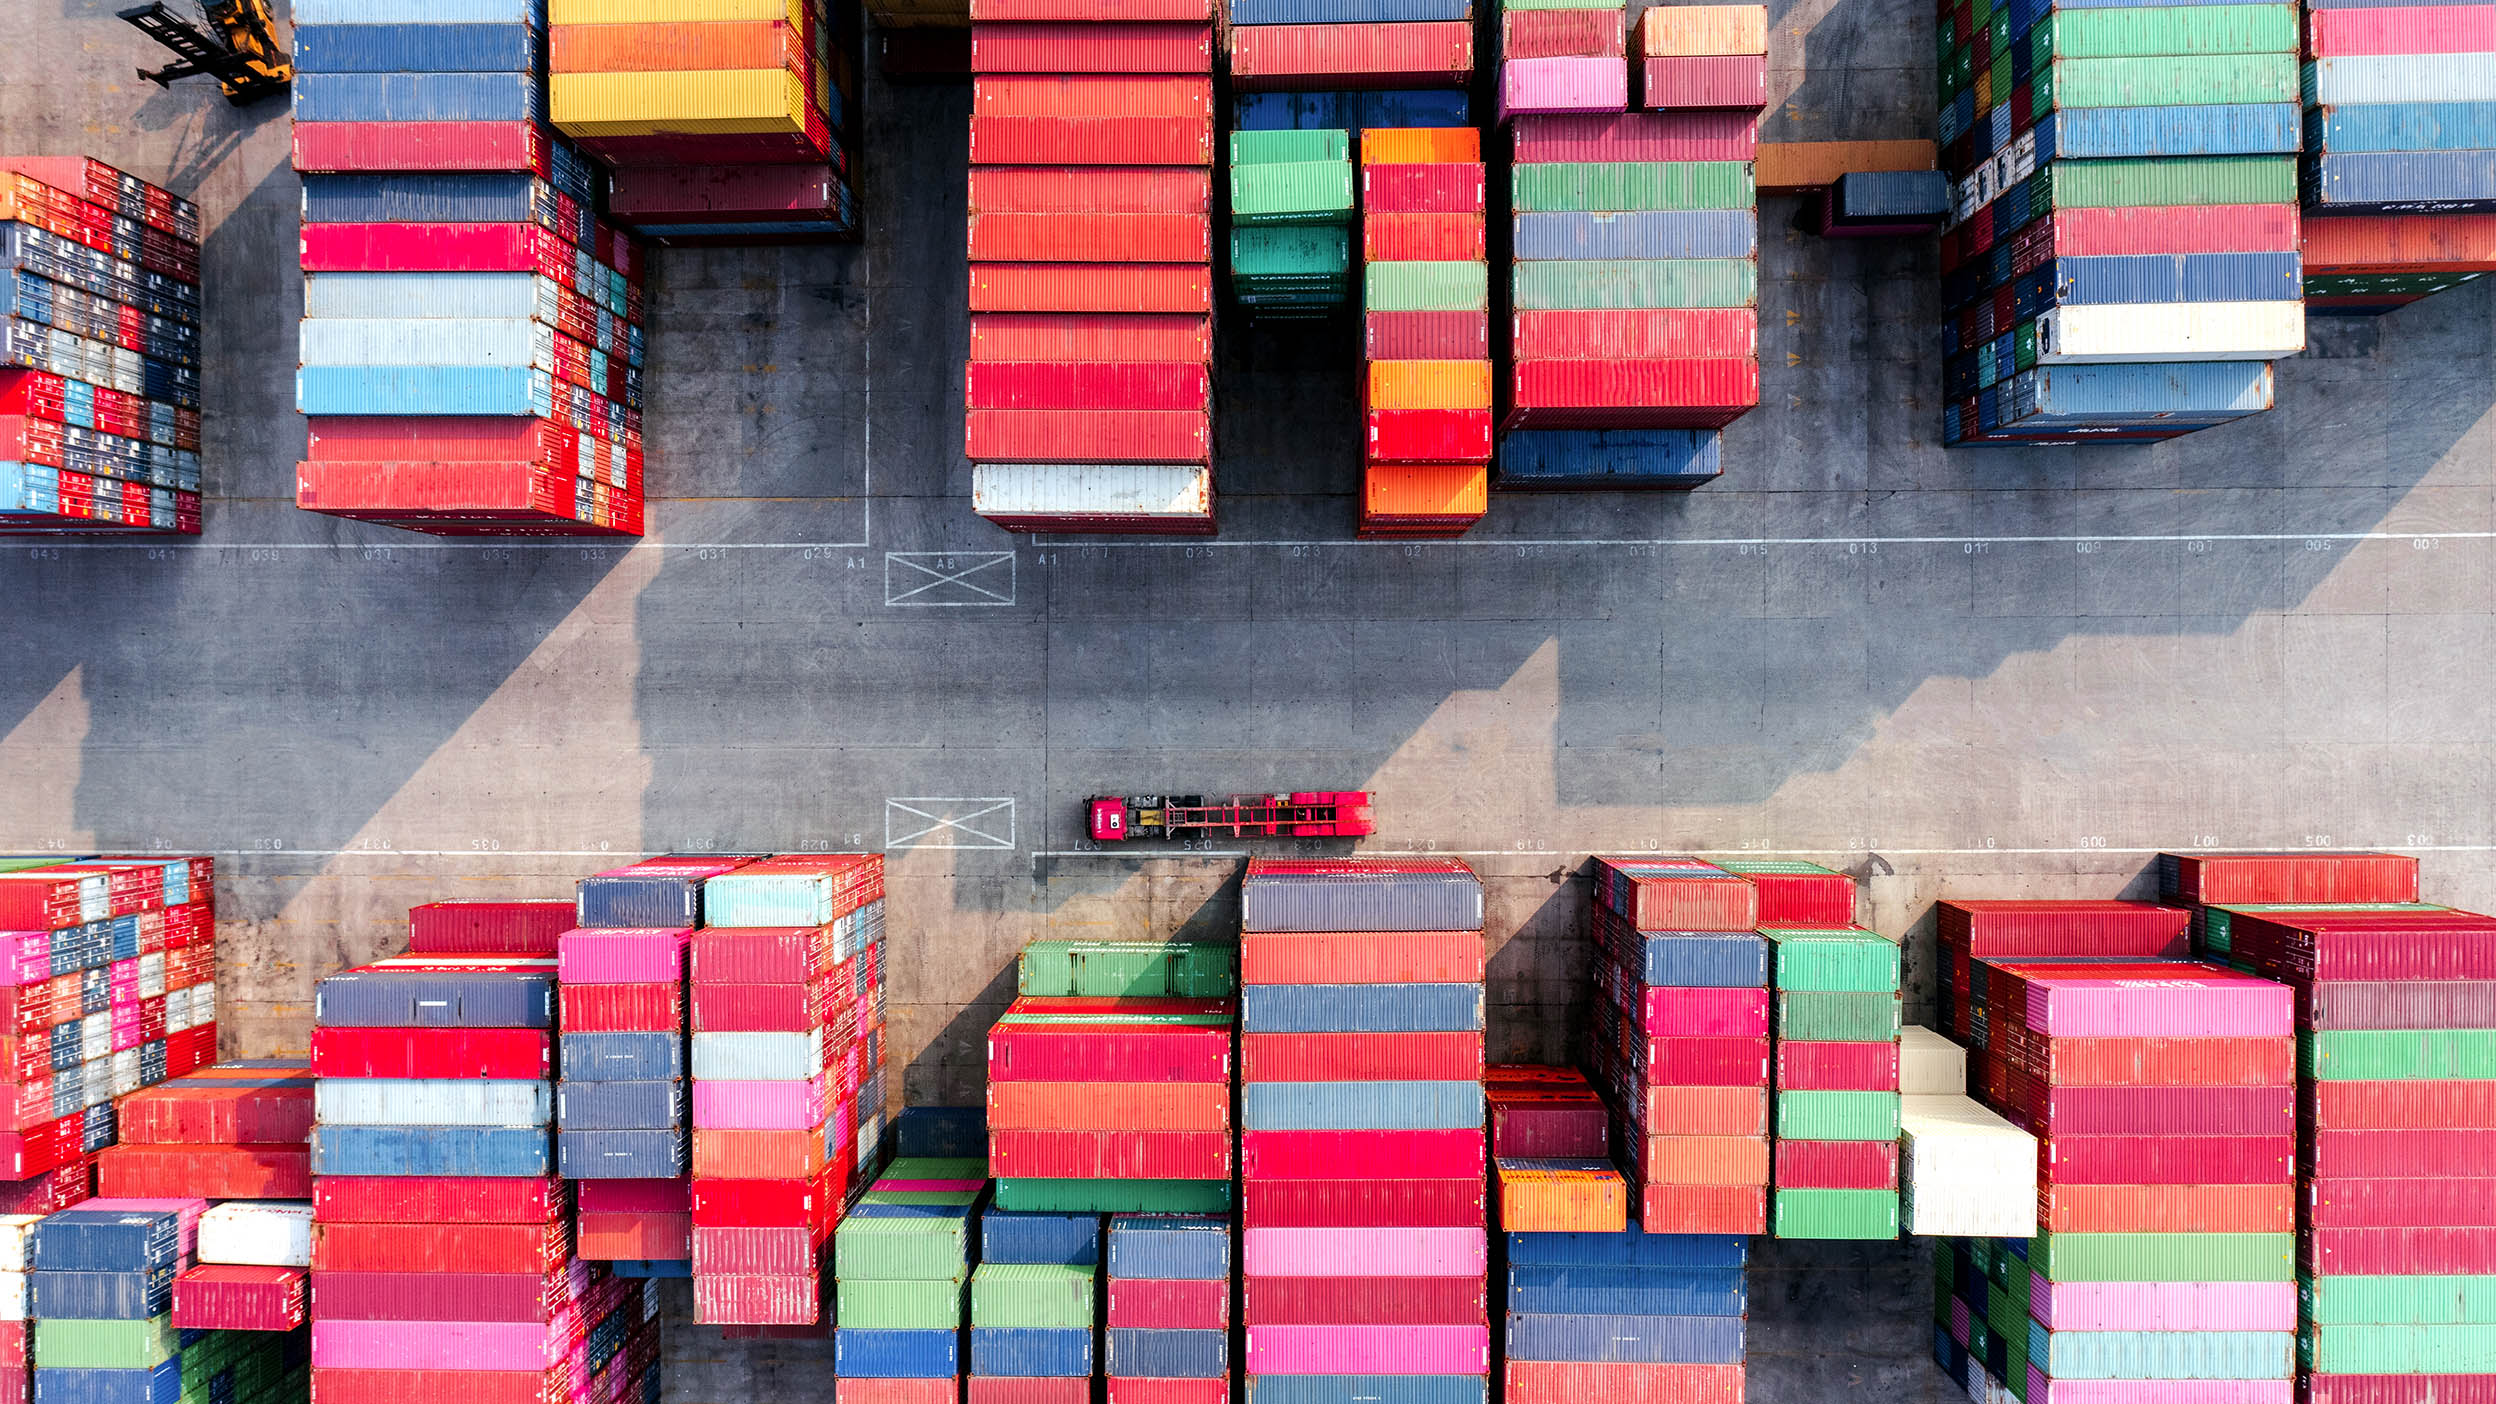 Aerial view of shipping containers from above, in an array of colors.